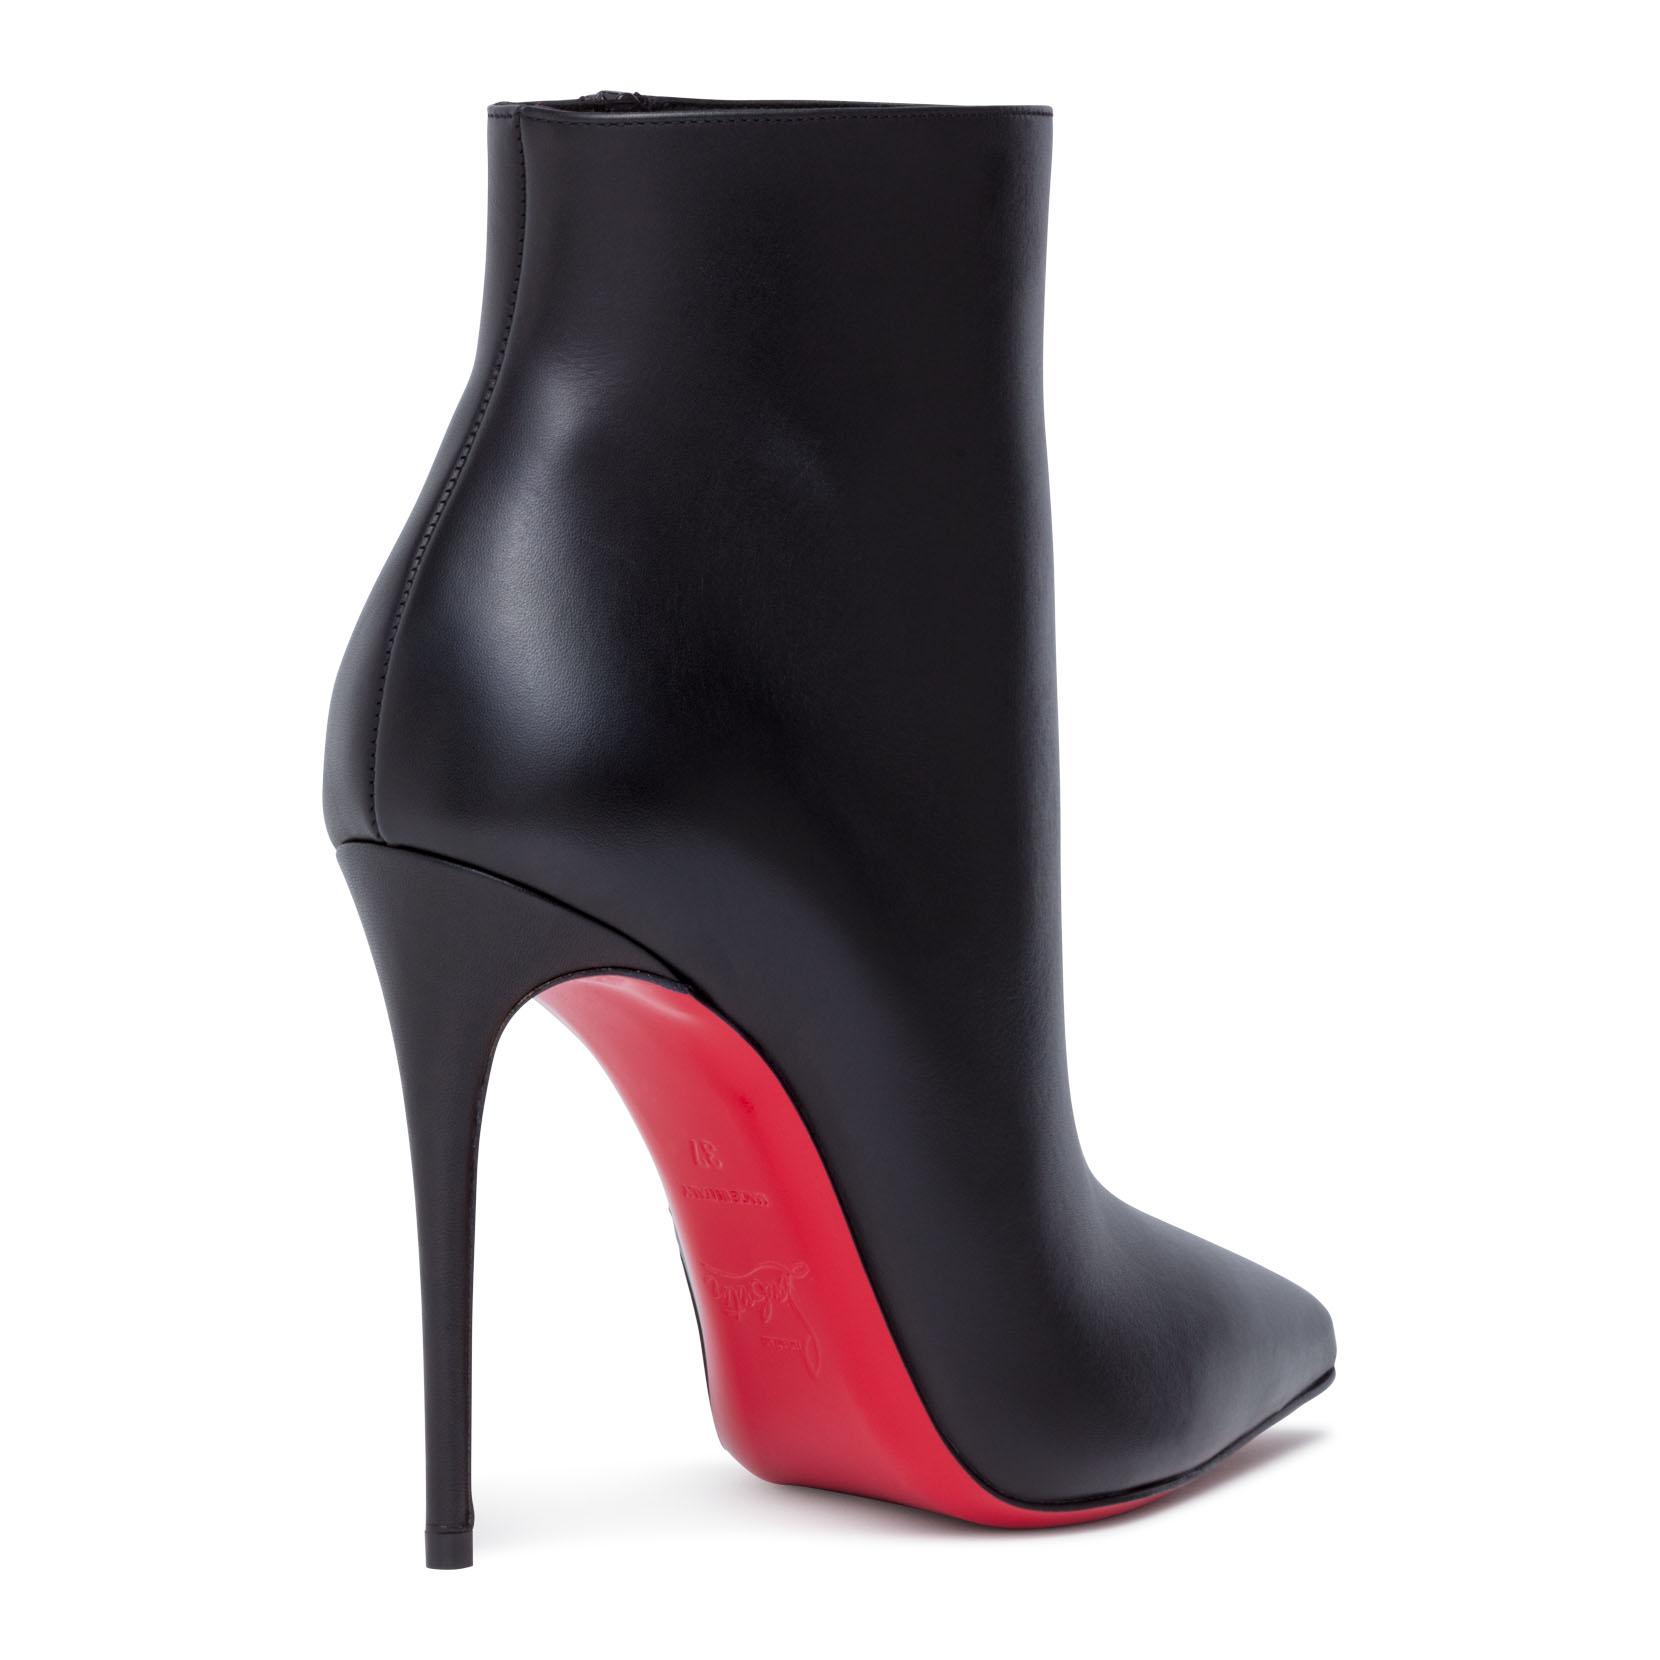 Lyst - Christian Louboutin So Kate 100 Black Leather Booties in Black